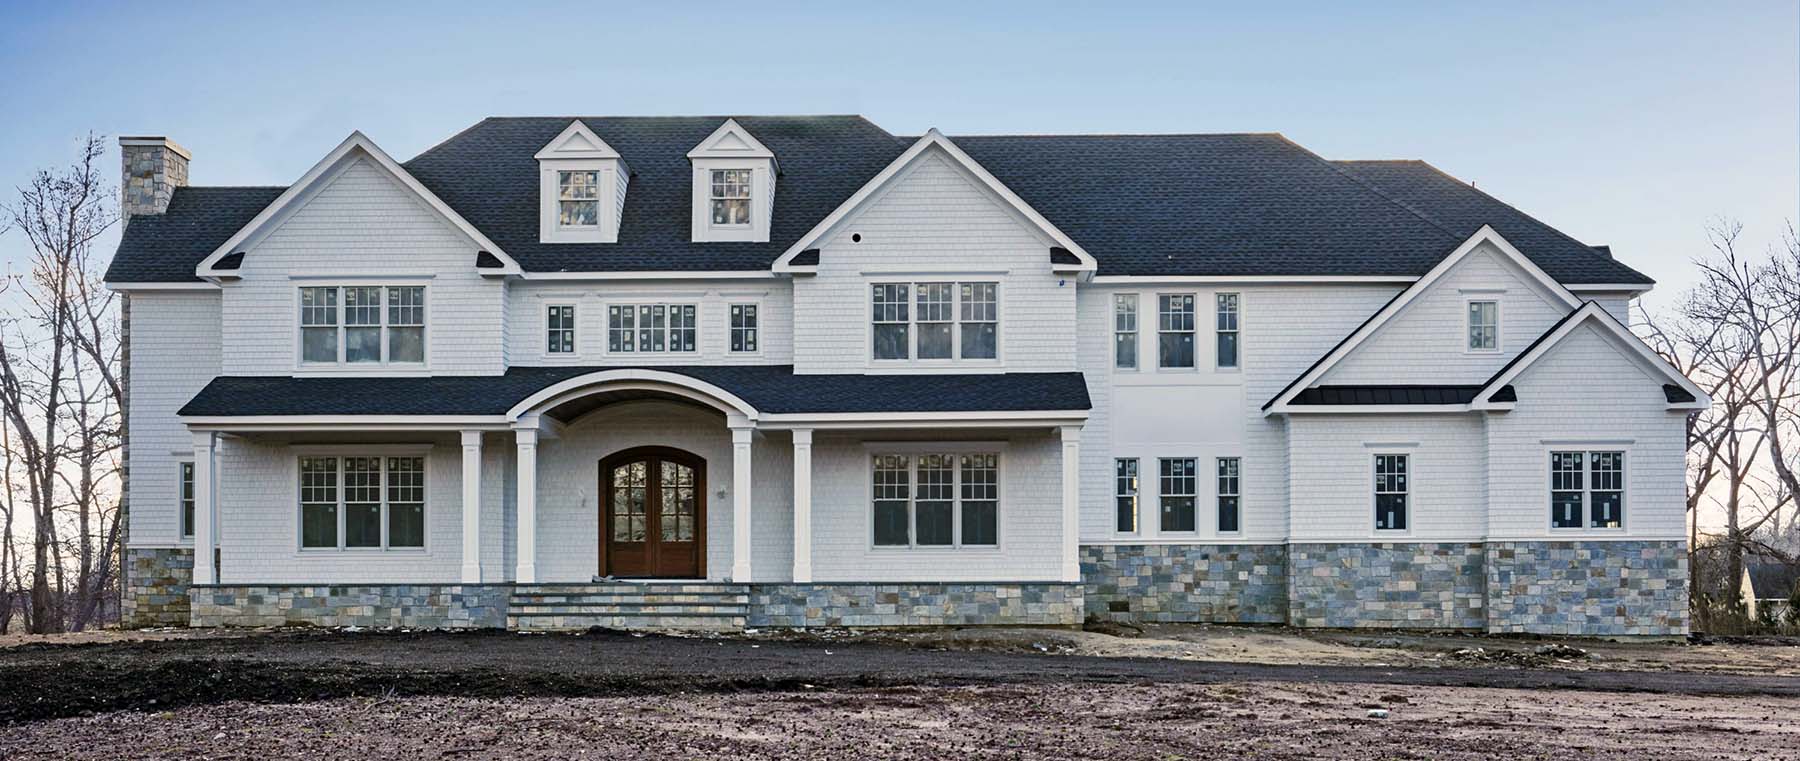 stunning custom home white siding real stone base brown front door